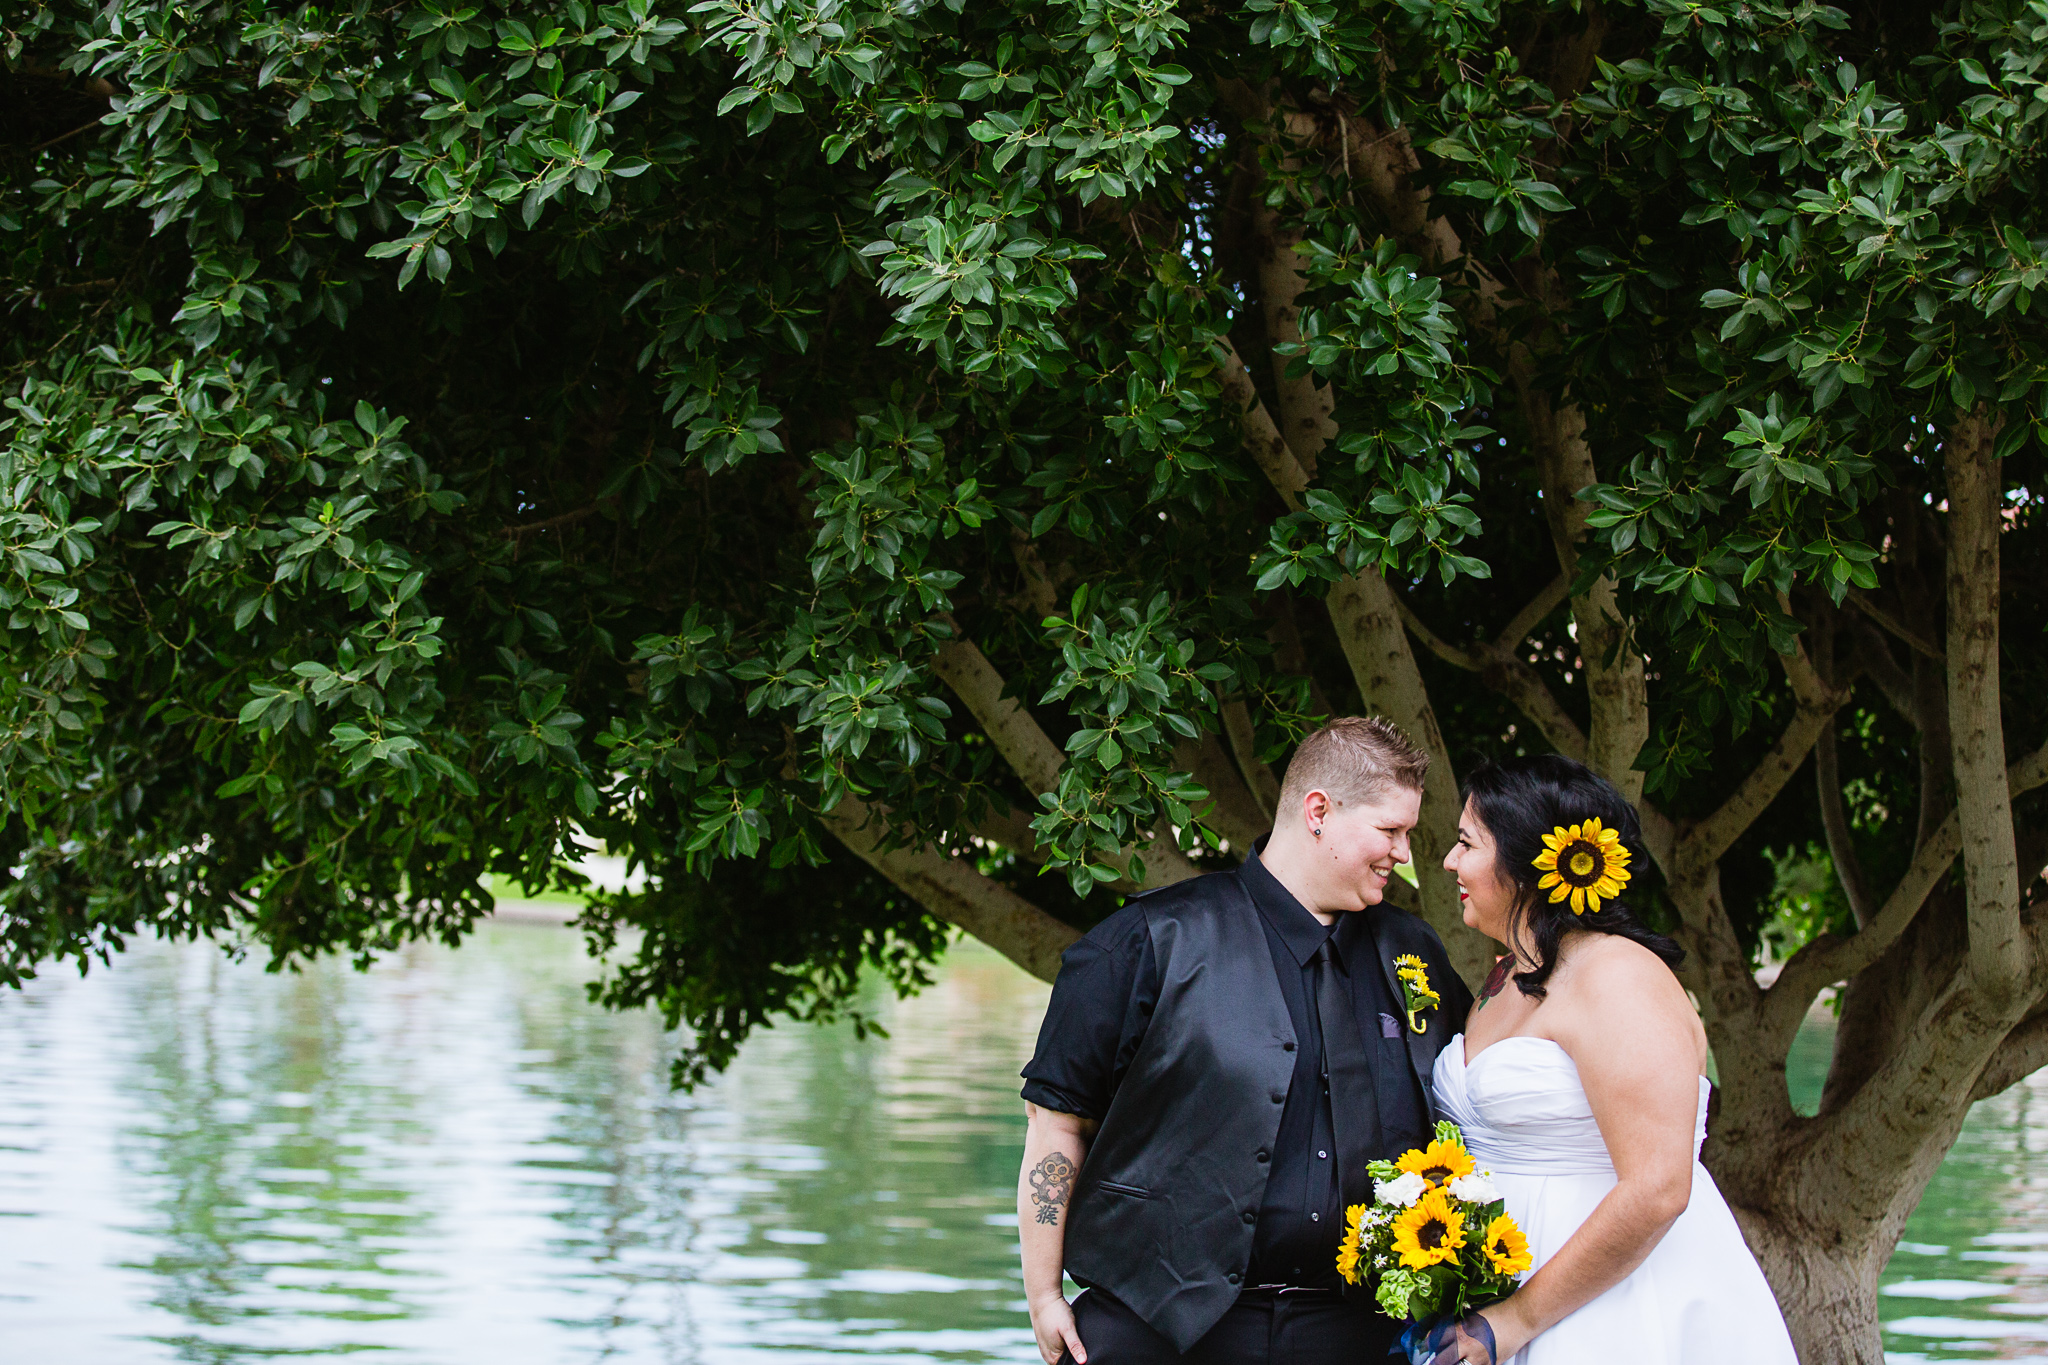 Same sex couple looking at each other in front of a tree and lake by Phoenix wedding photographer PMA Photography.